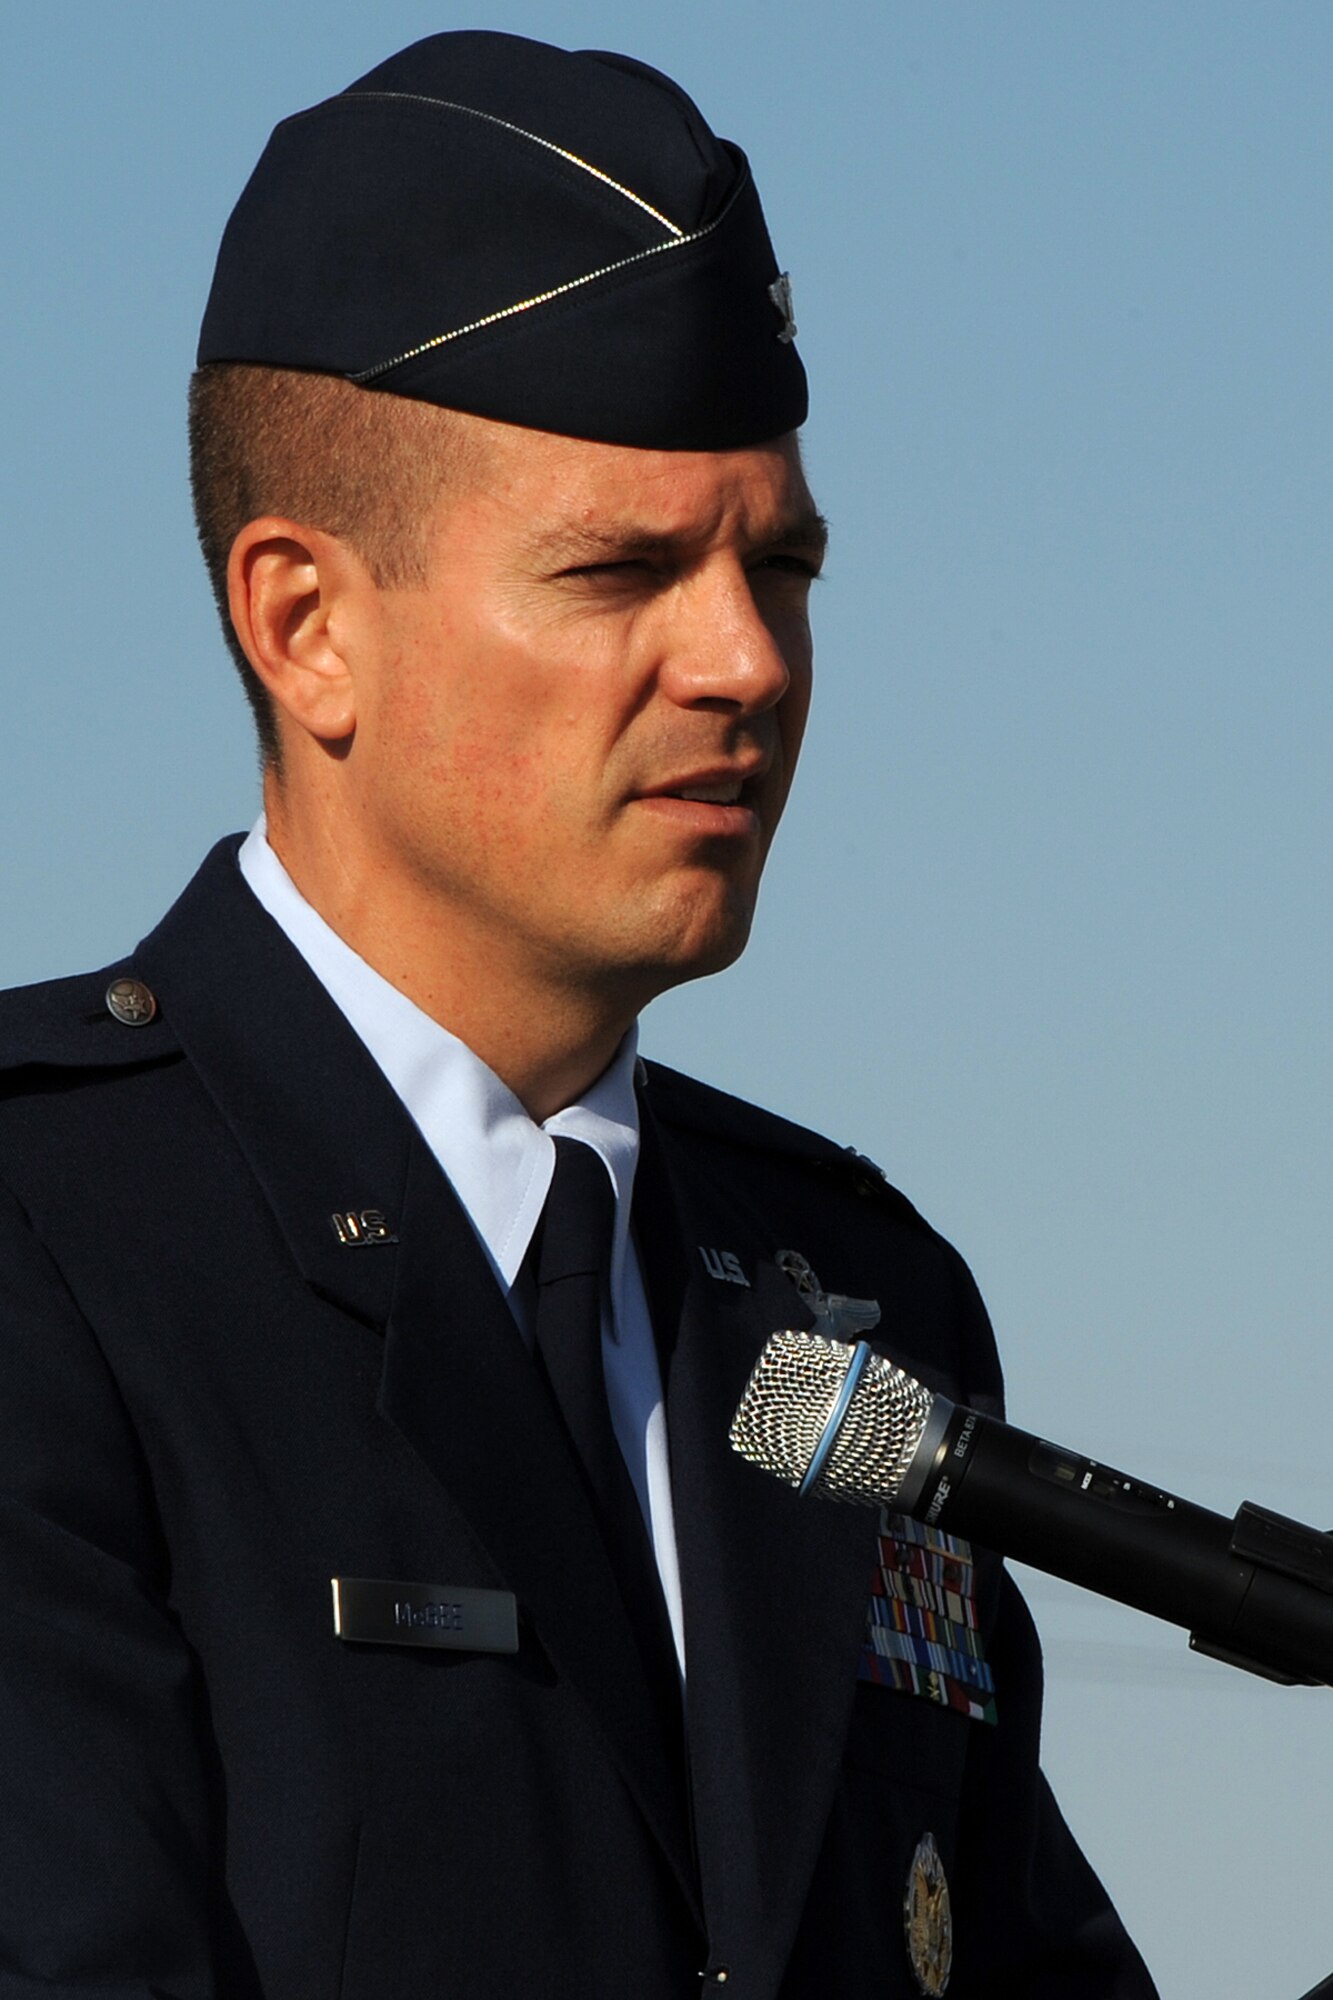 Col. Michael McGee, 49th Fighter Wing vice commander, speaks during the Prisoners of War/ Missing in Action Day ceremony held on September 23 at Holloman AFB, N.M. (U.S. Air Force photo/ Staff Sgt. Chris Flahive)